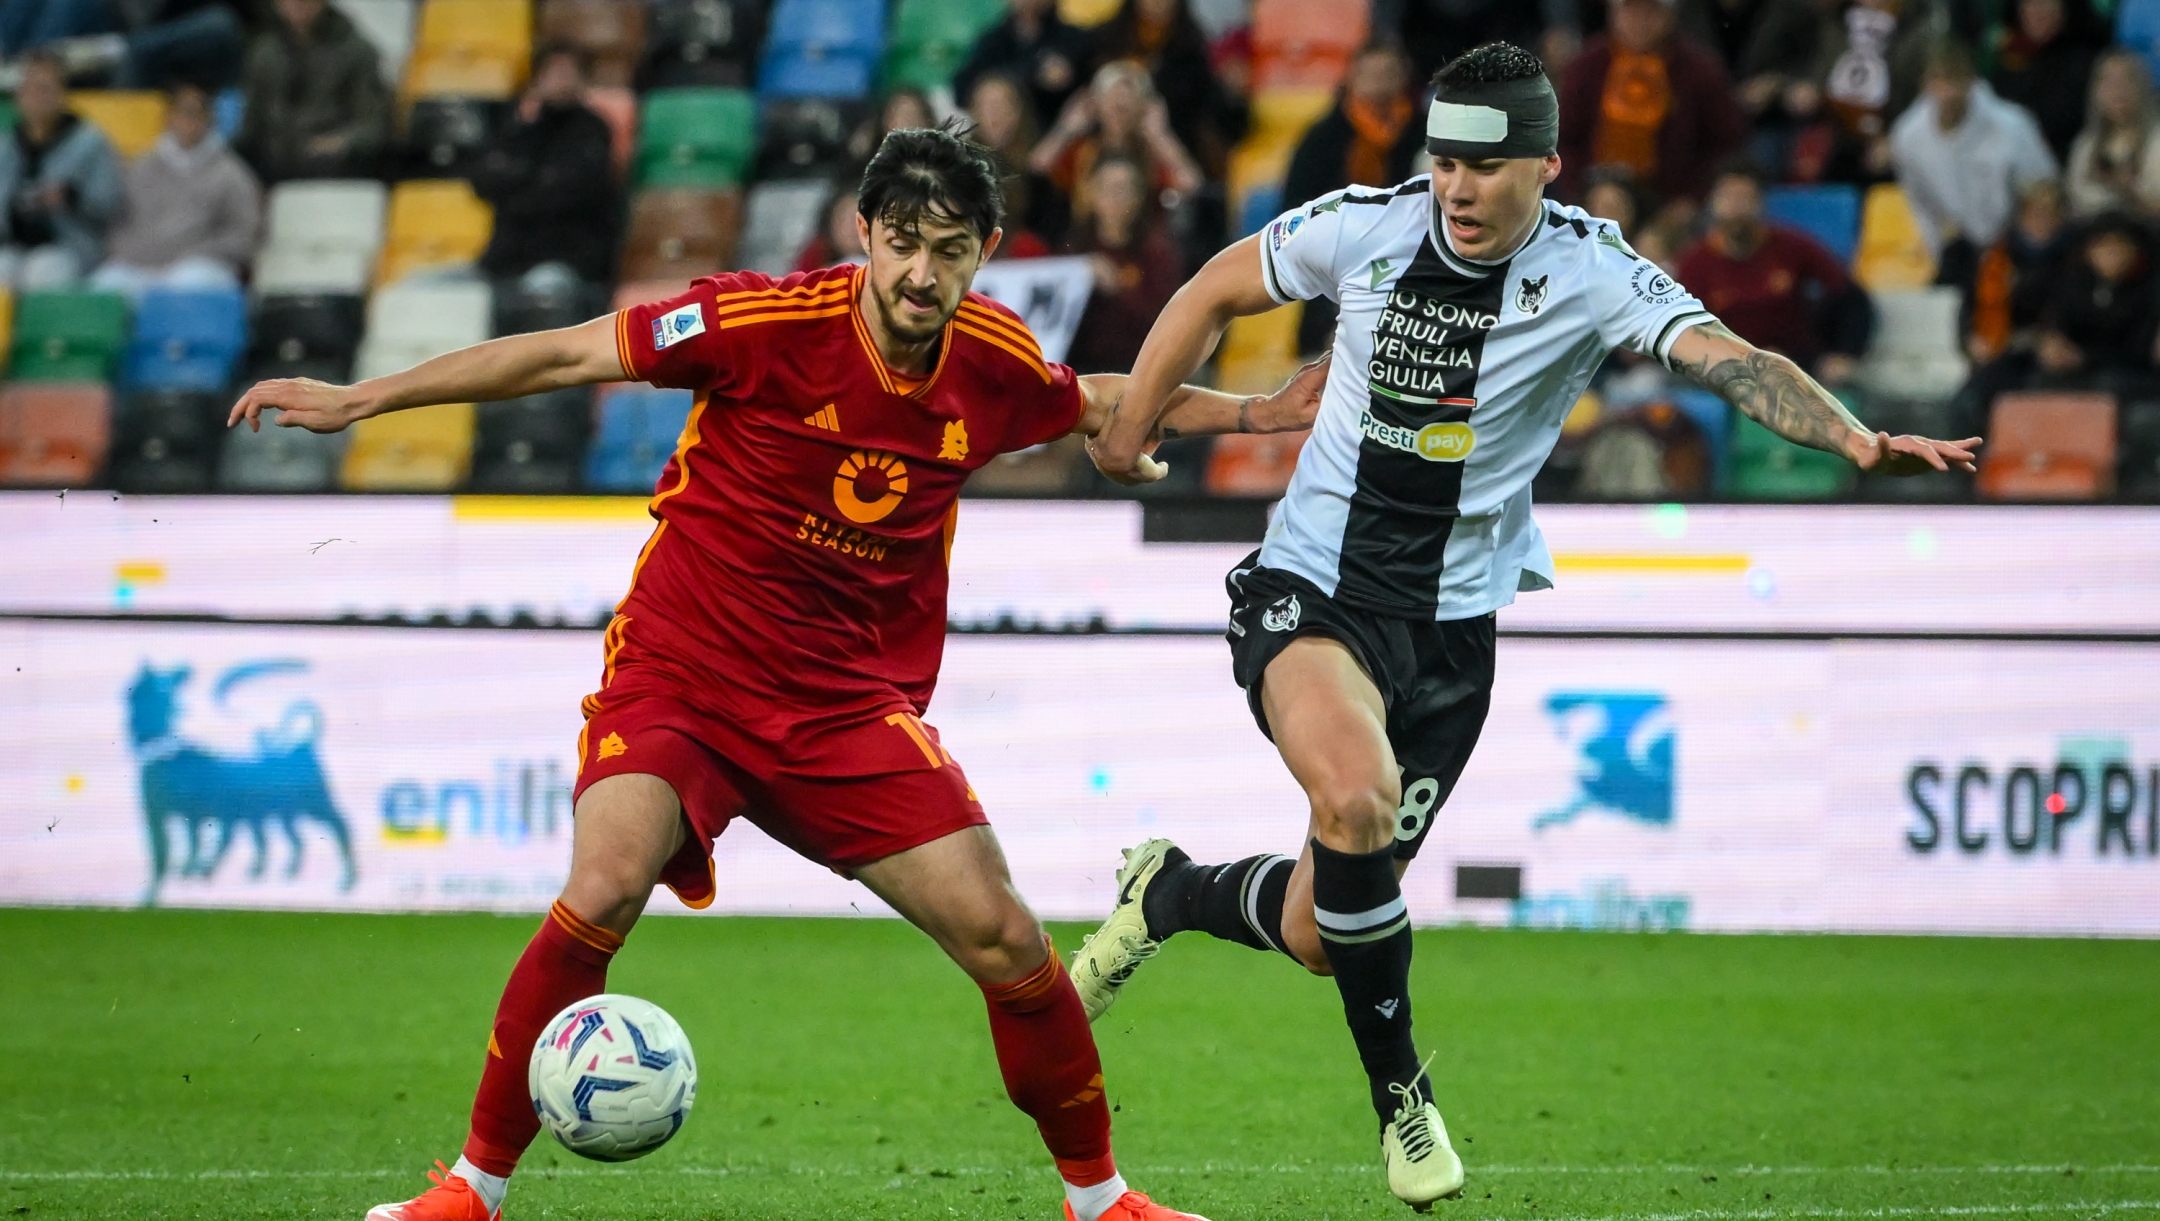 UDINE, ITALY - APRIL 25: Sardar Azmoun of AS Roma competes for the ball during the Serie A TIM match between Udinese Calcio and AS Roma at Dacia Arena on April 25, 2024 in Udine, Italy. (Photo by Fabio Rossi/AS Roma via Getty Images) (Photo by Fabio Rossi/AS Roma via Getty Images)